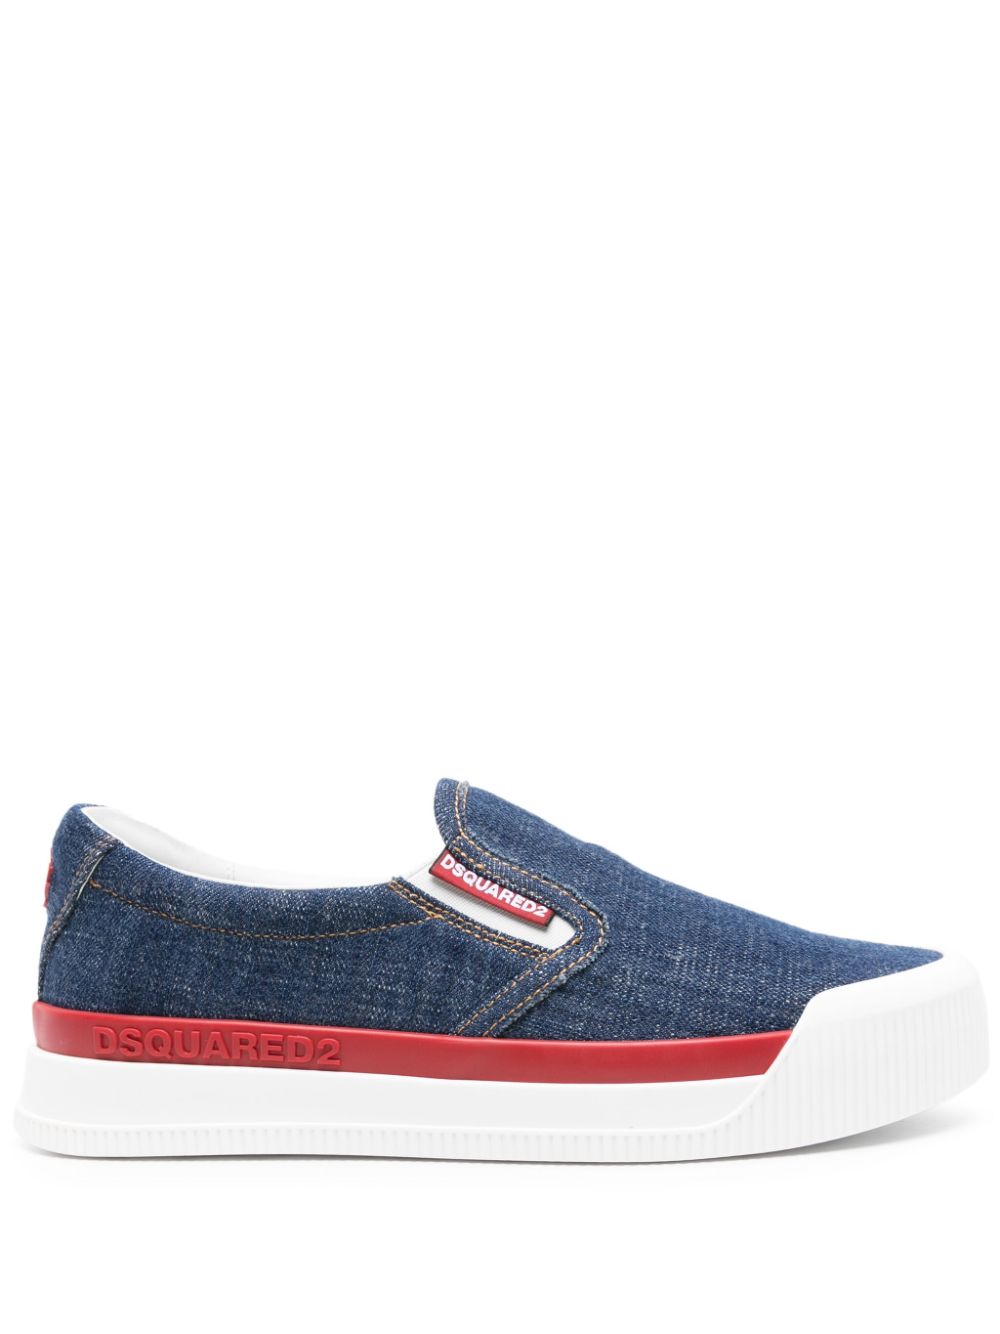 DSQUARED2 NEW JERSEY SLIP-ON SNEAKERS